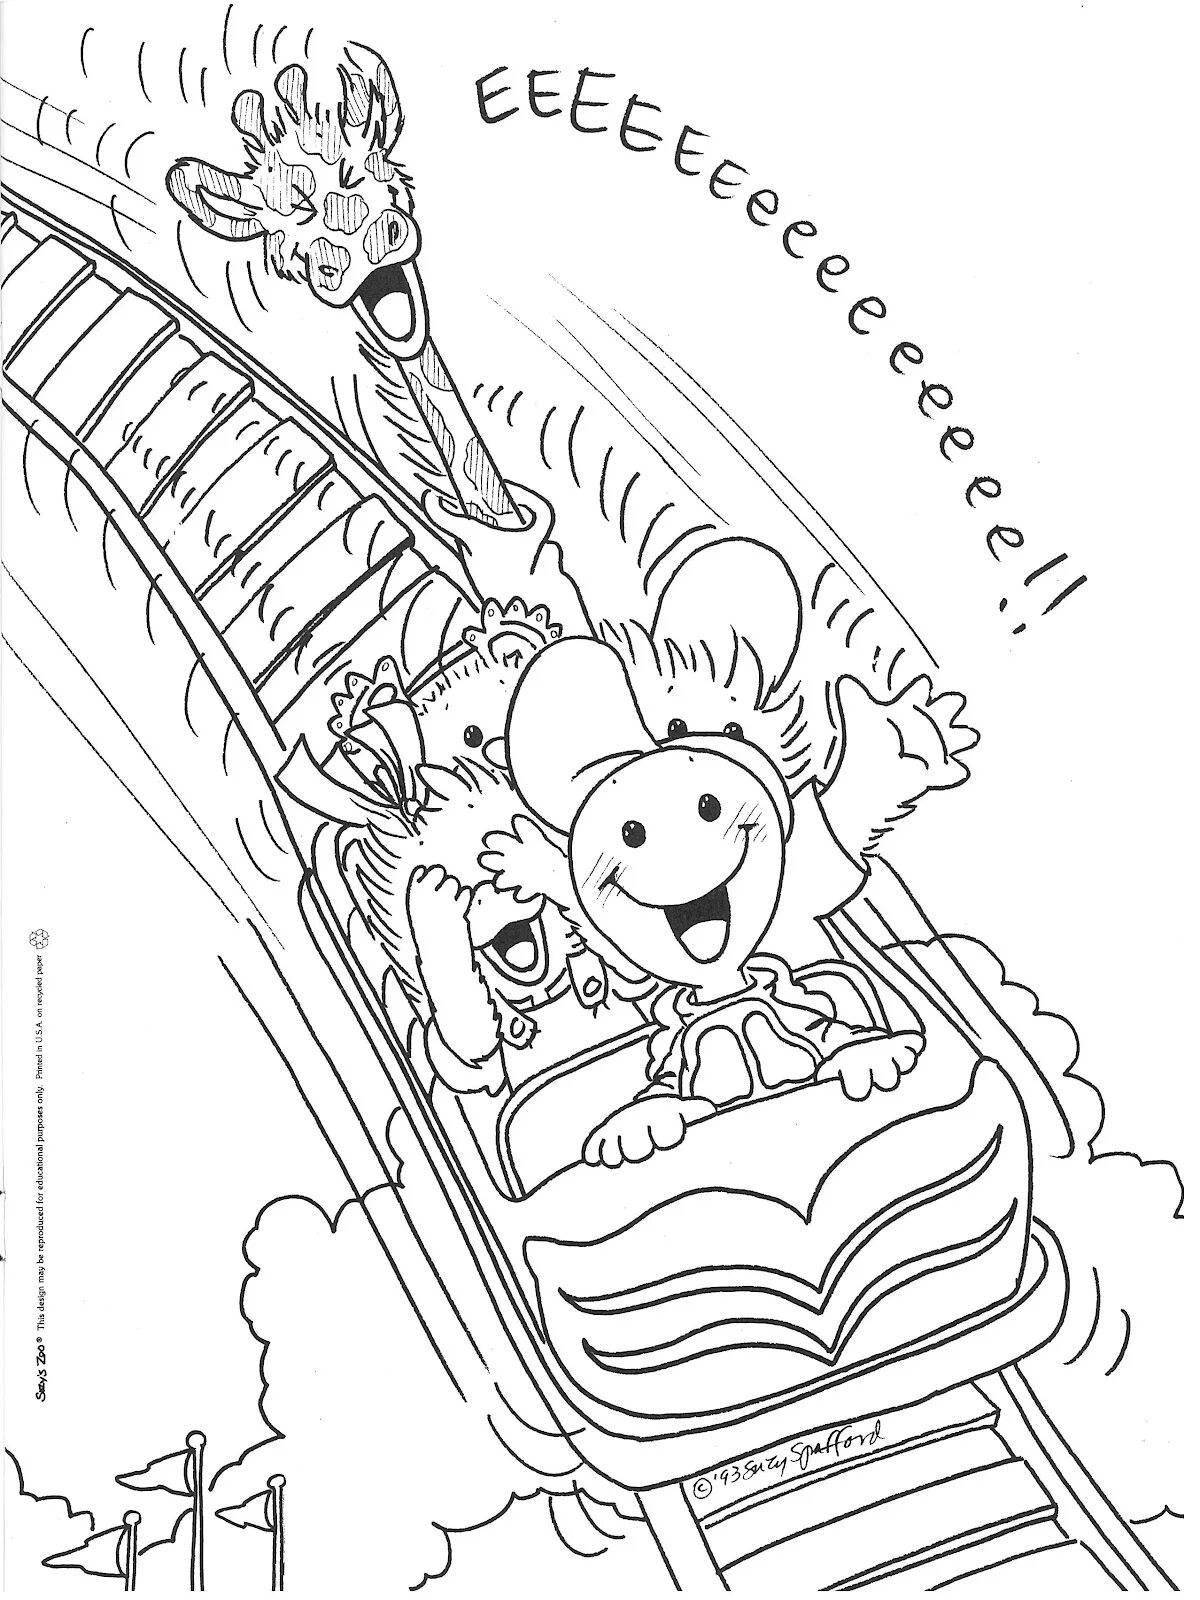 Vibrant bitter eater coloring page